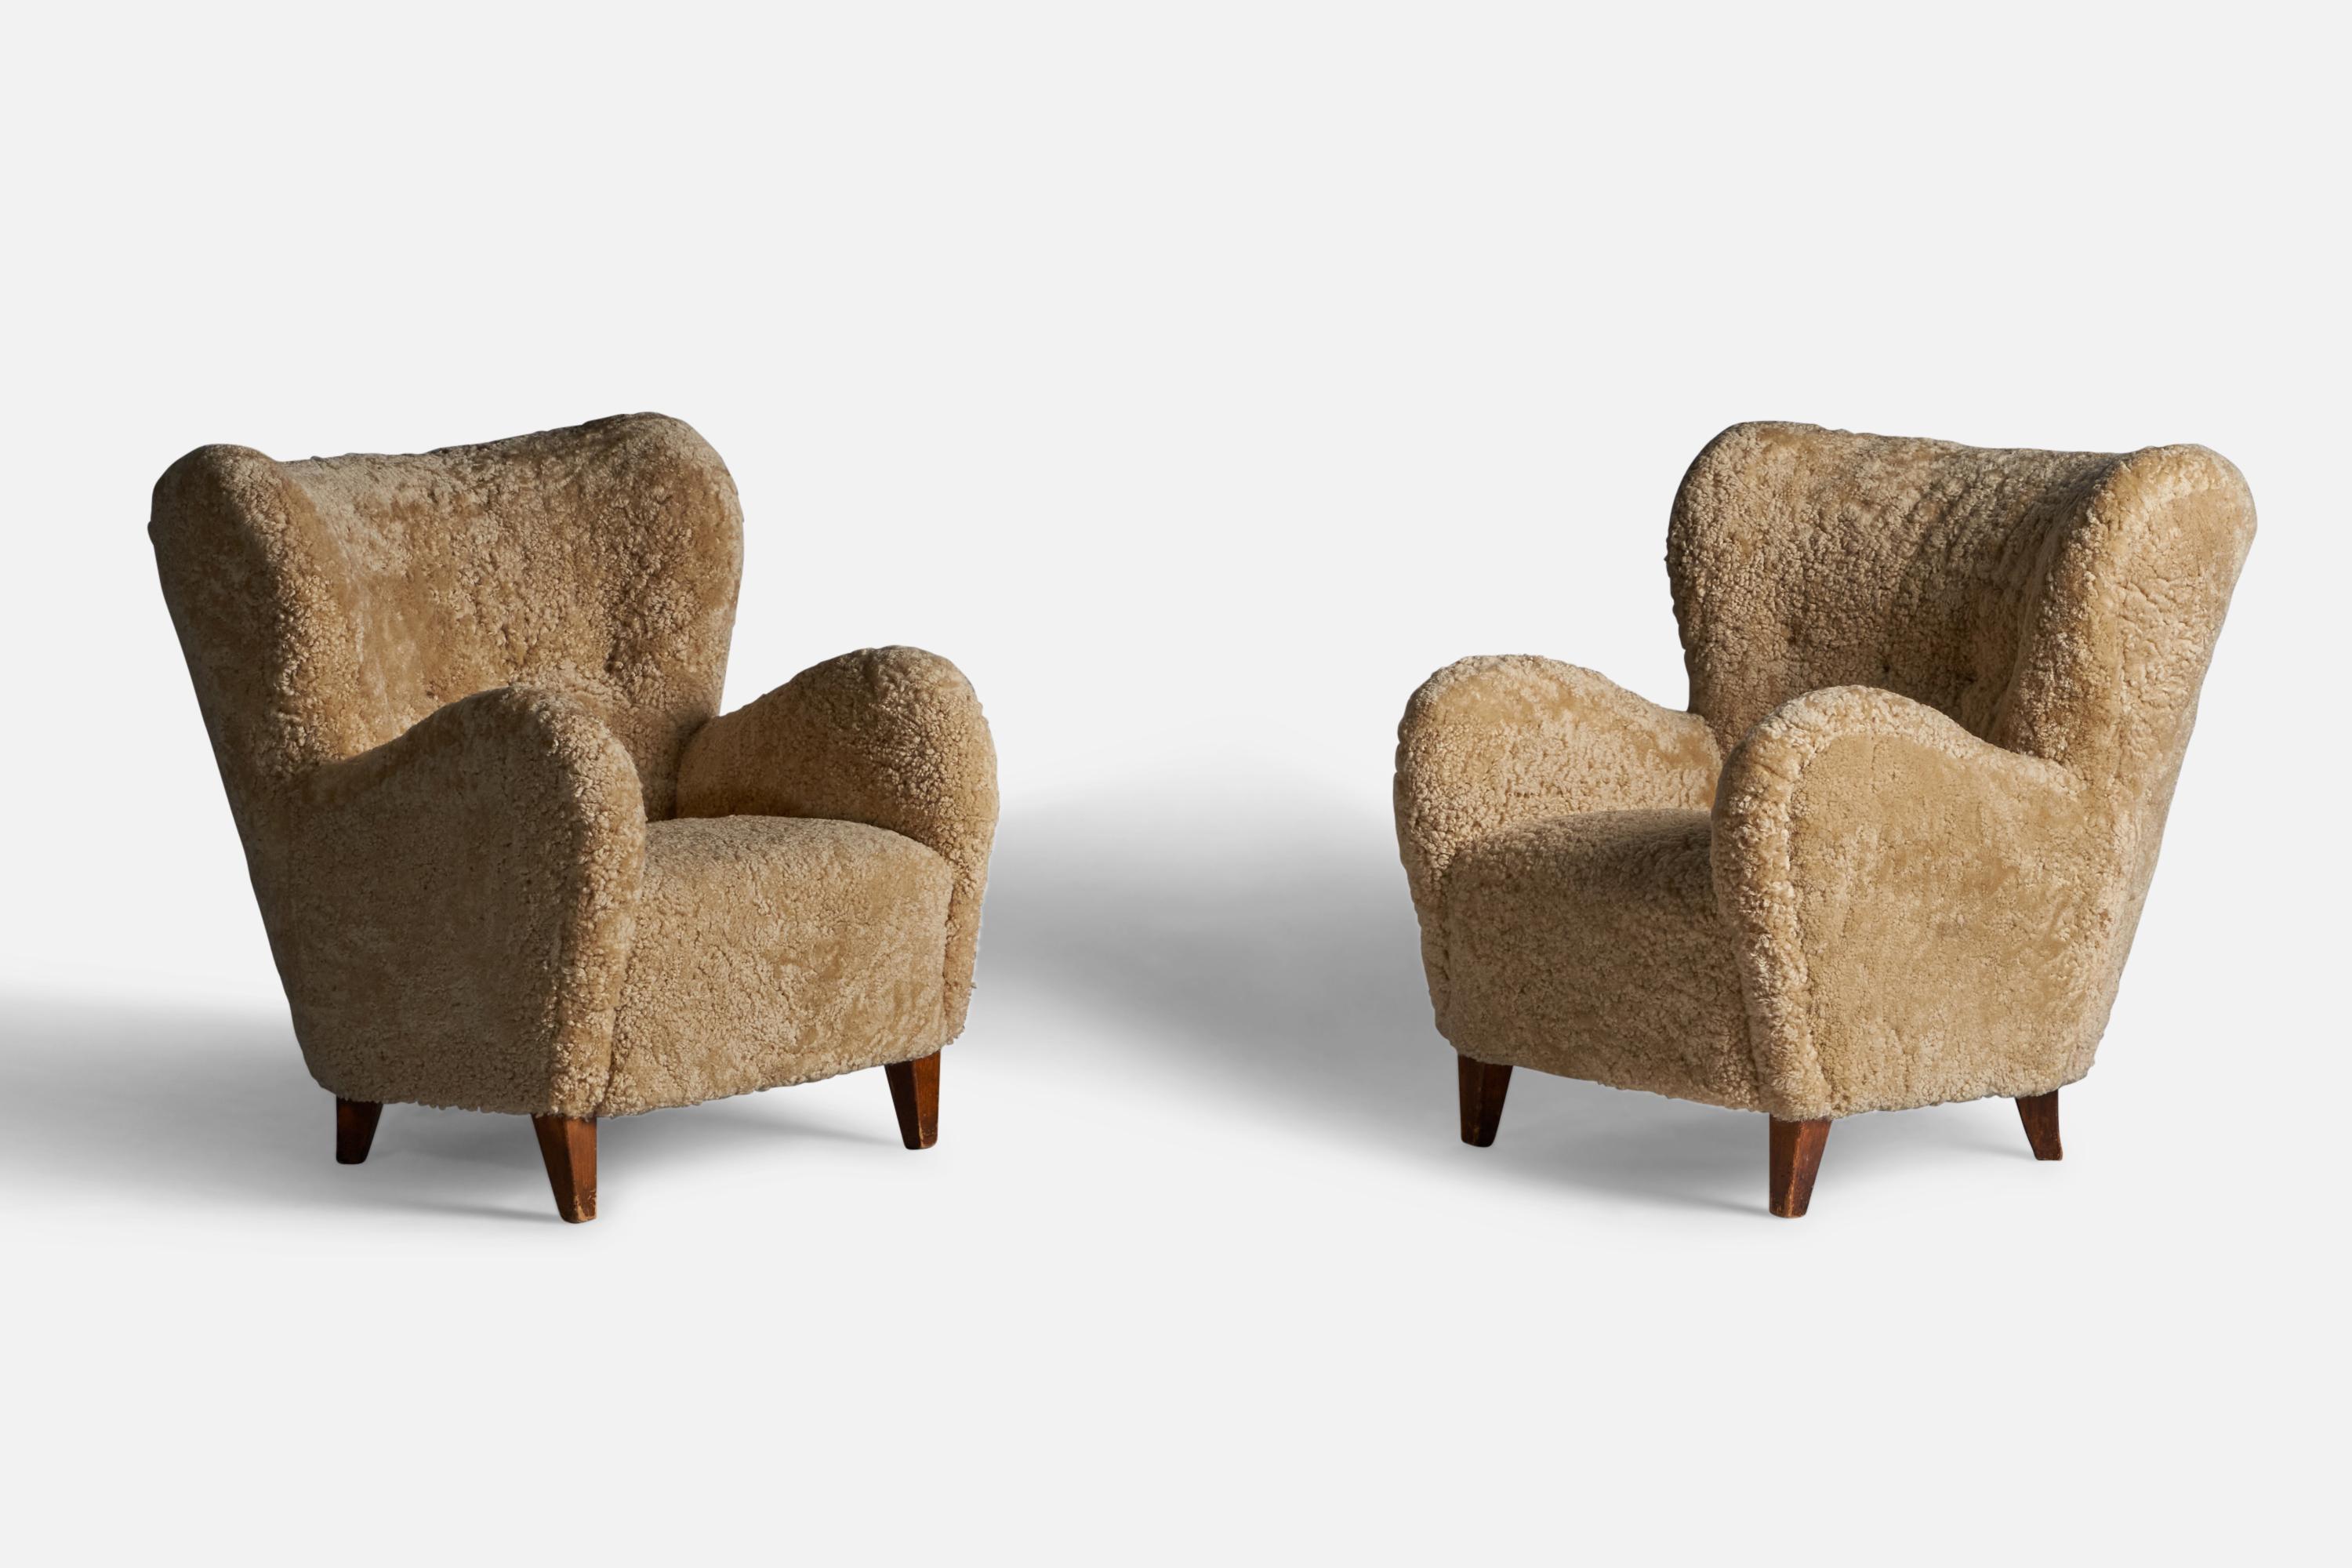 A pair of organic shearling and stained birch lounge chairs, designed and produced in Finland, 1940s.
